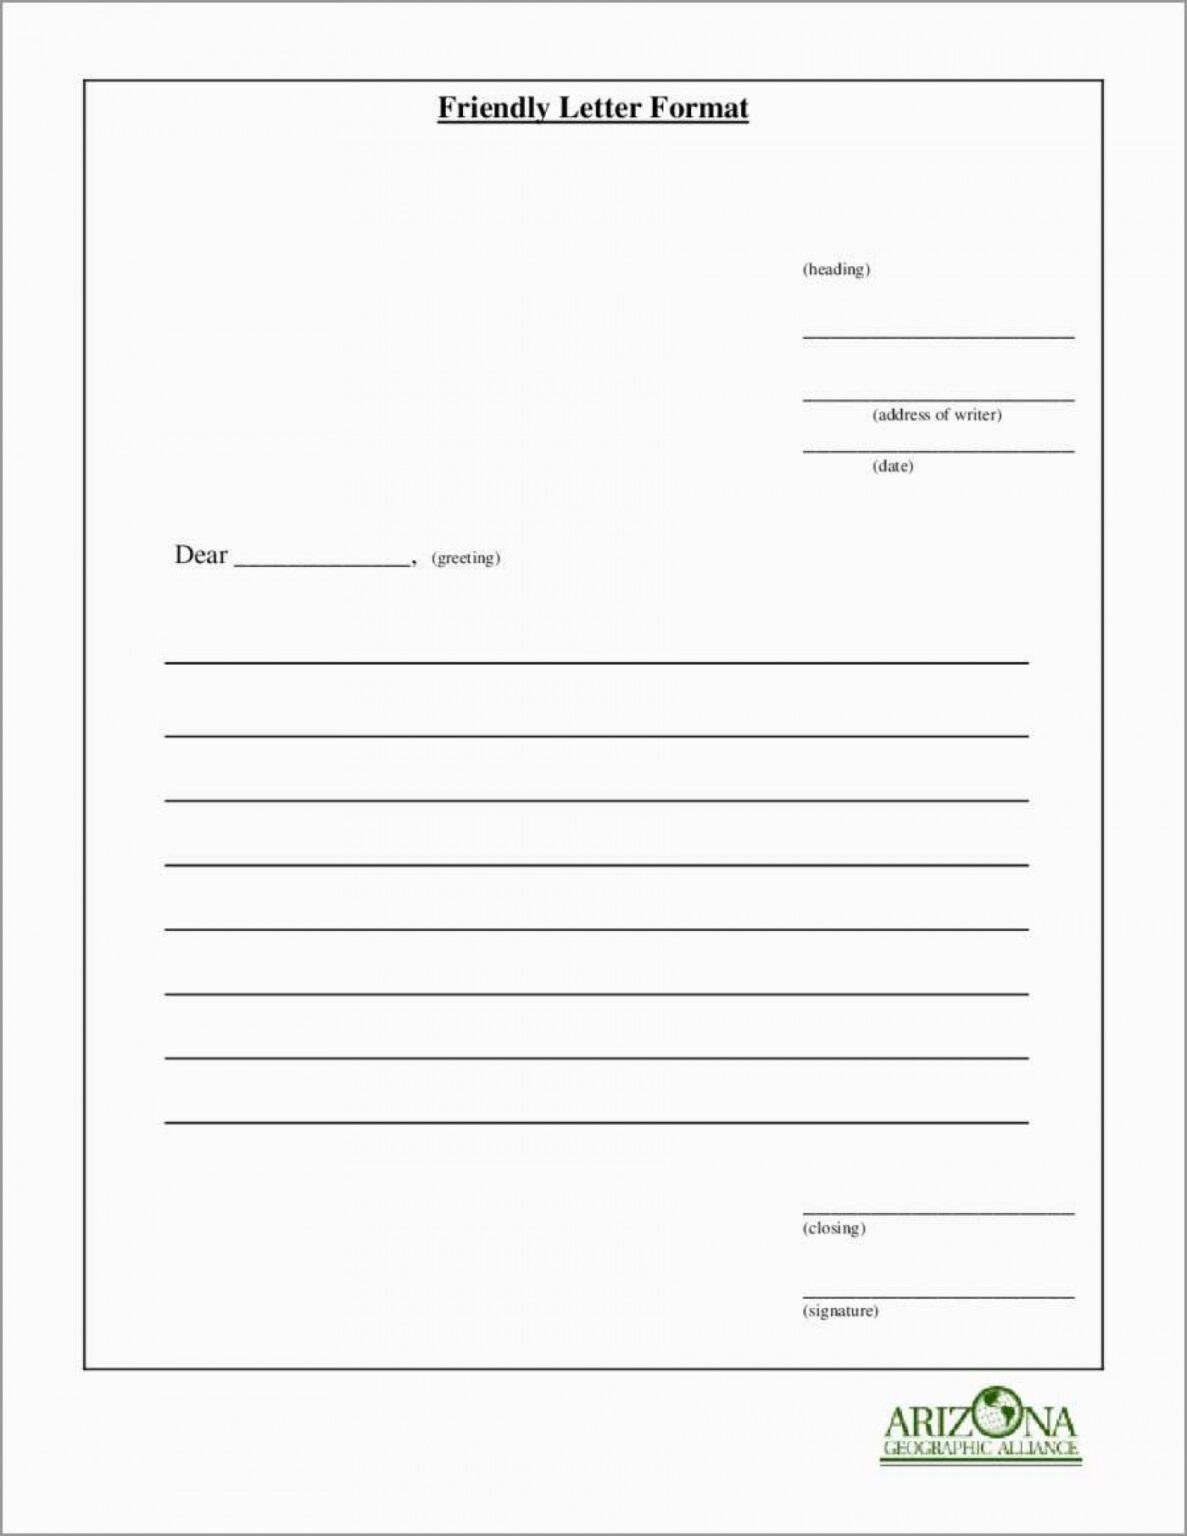 002-free-letter-writing-template-ideas-best-online-format-inside-blank-letter-writing-template